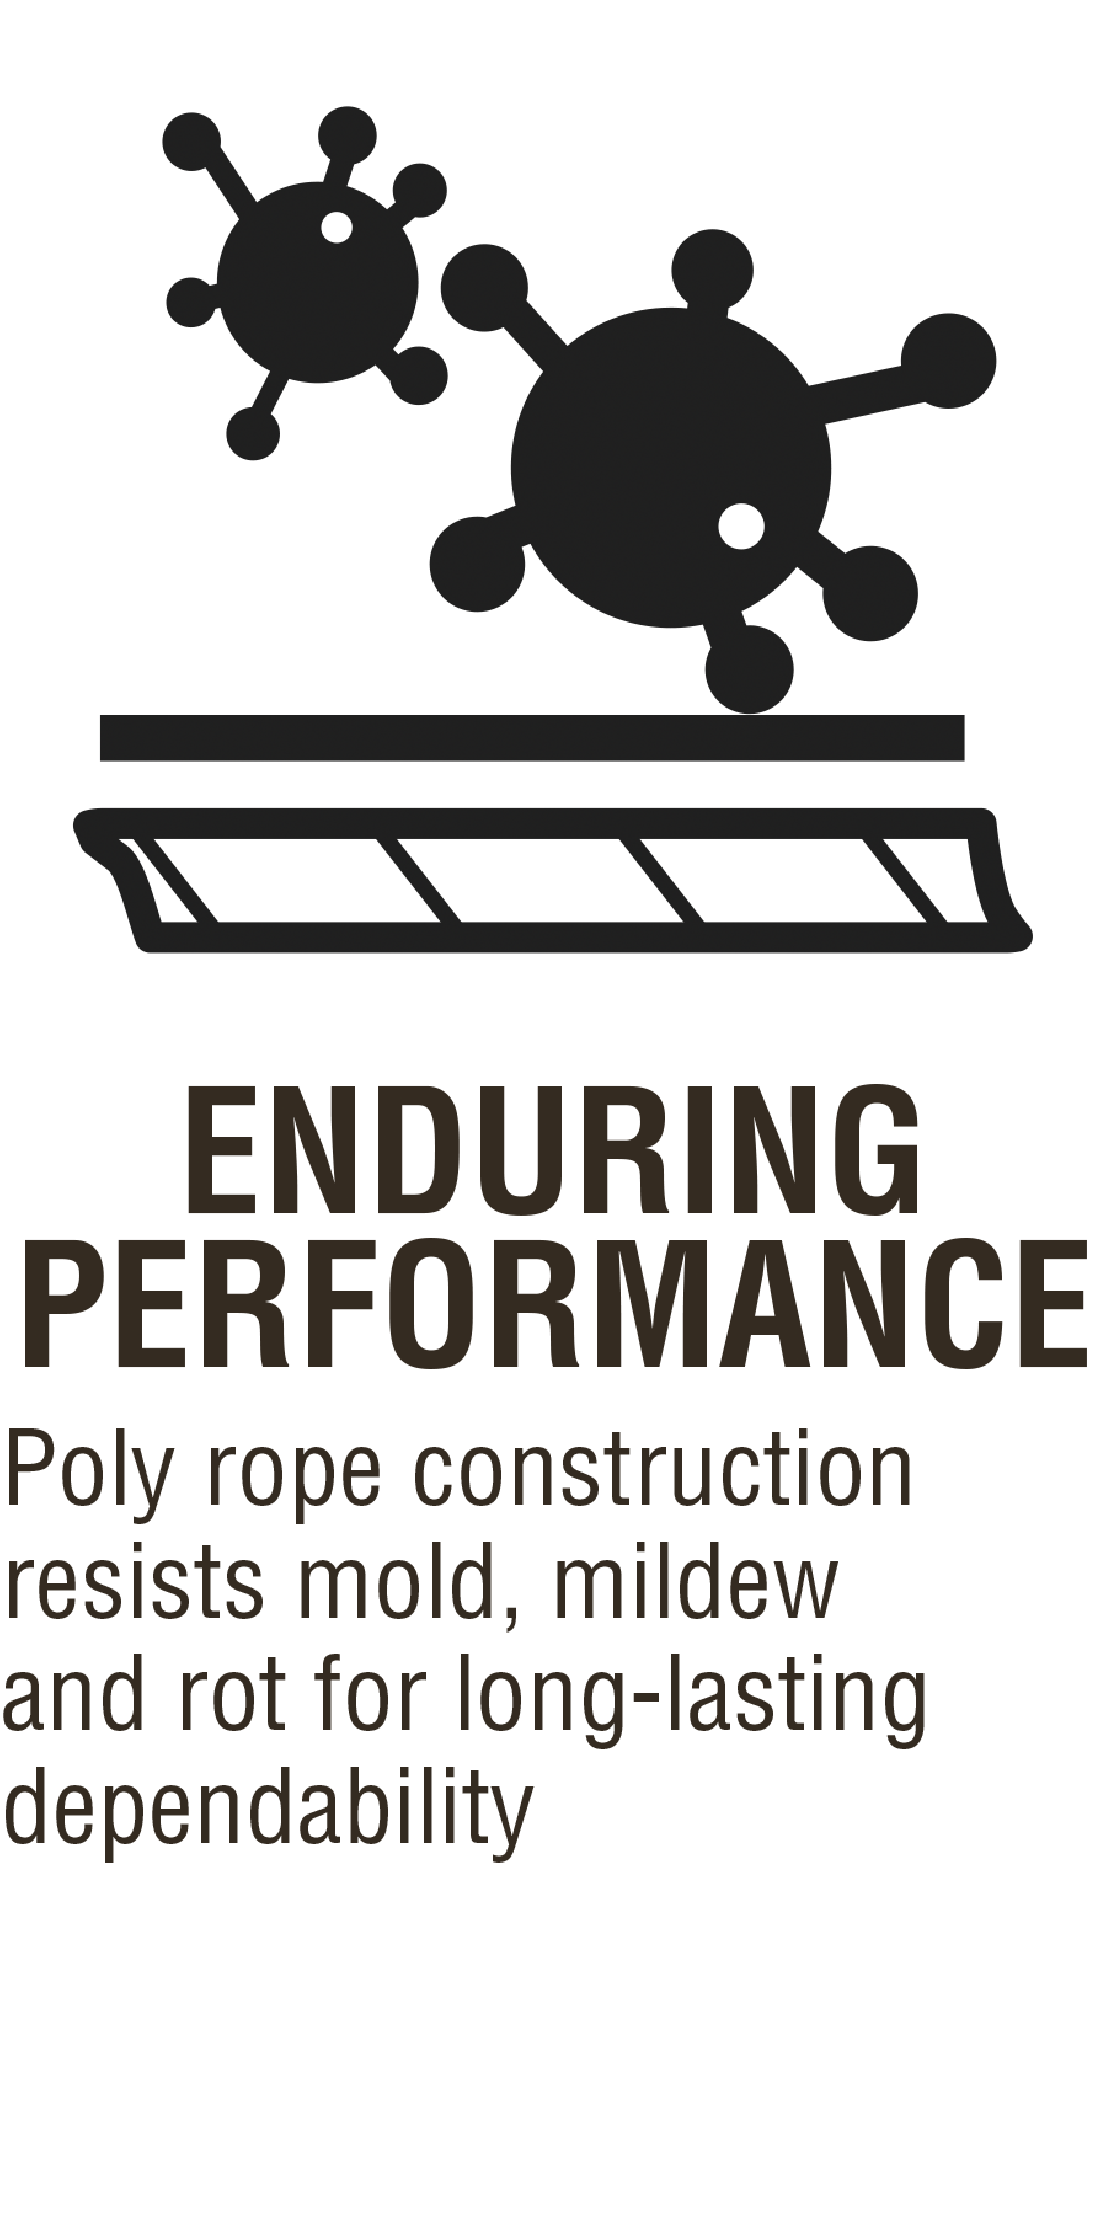 Enduring Performance Poly rope construction resists mold, mildew and rot for long-lasting dependability